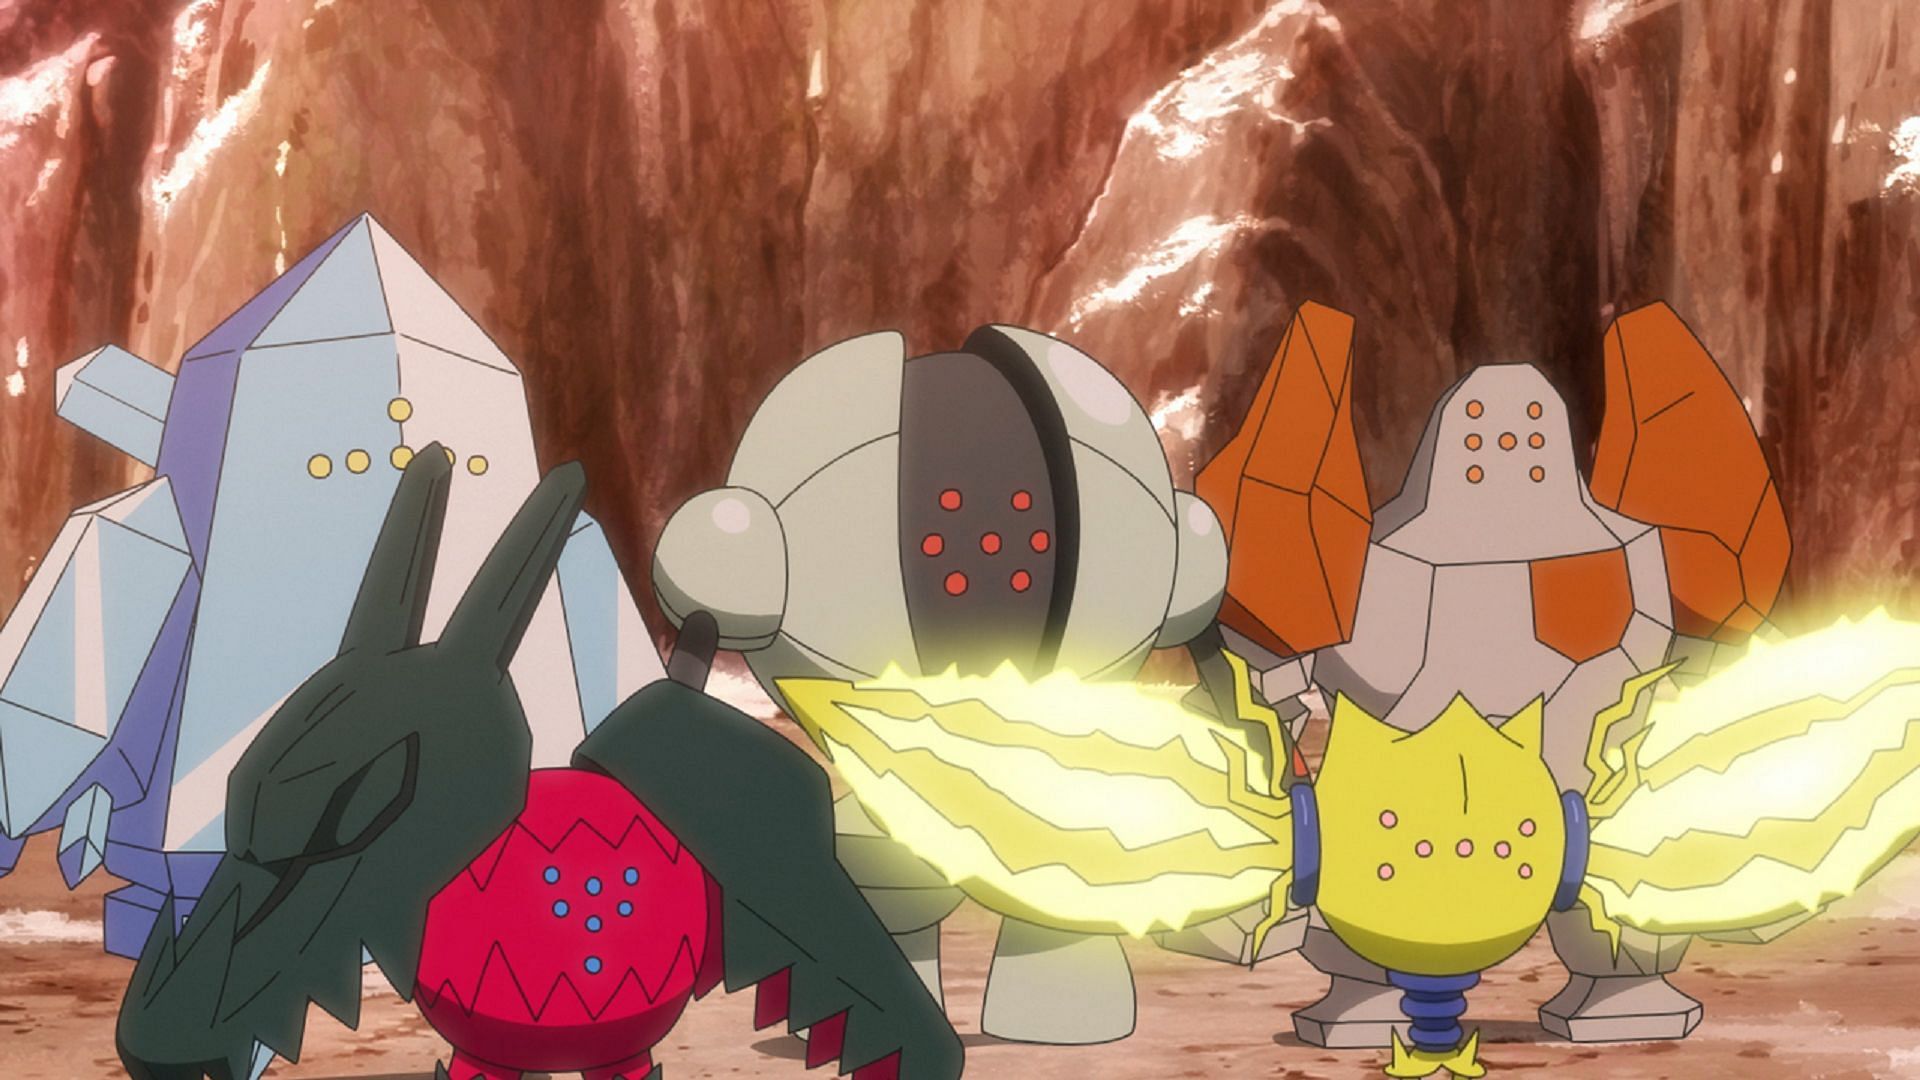 The Legendary Titans as they appear in the Pokemon animated series.